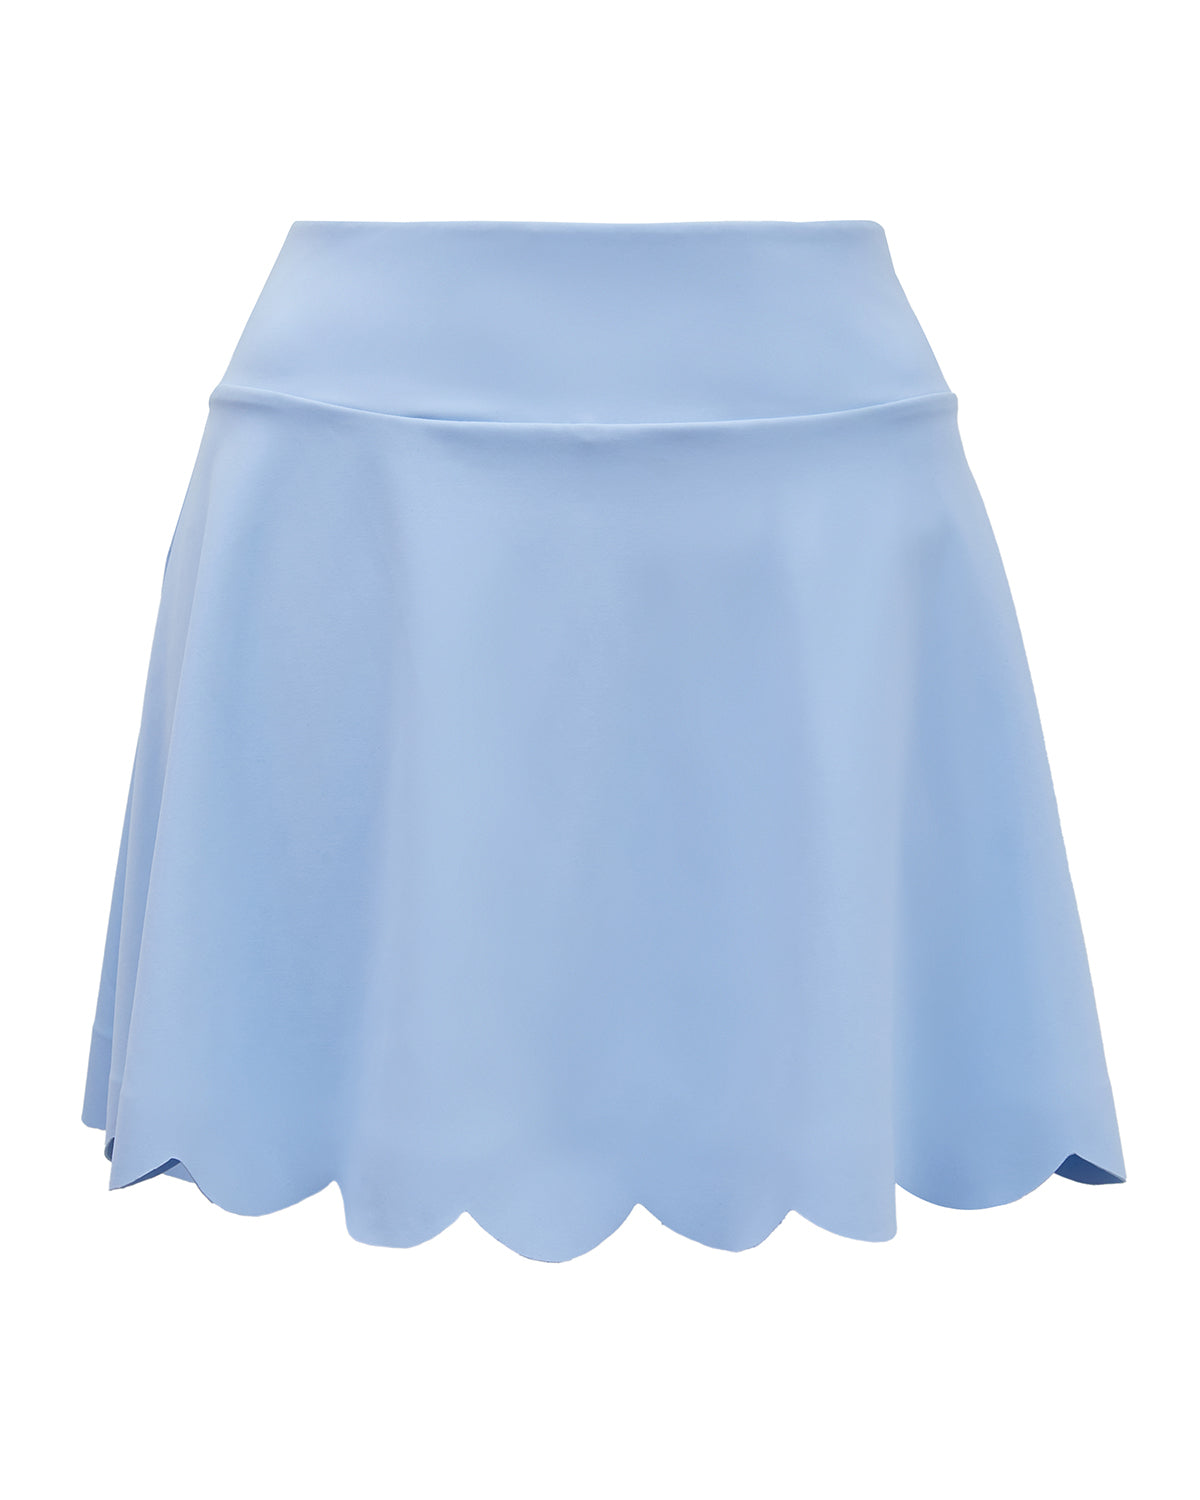 Adore Skirt in Baby Blue